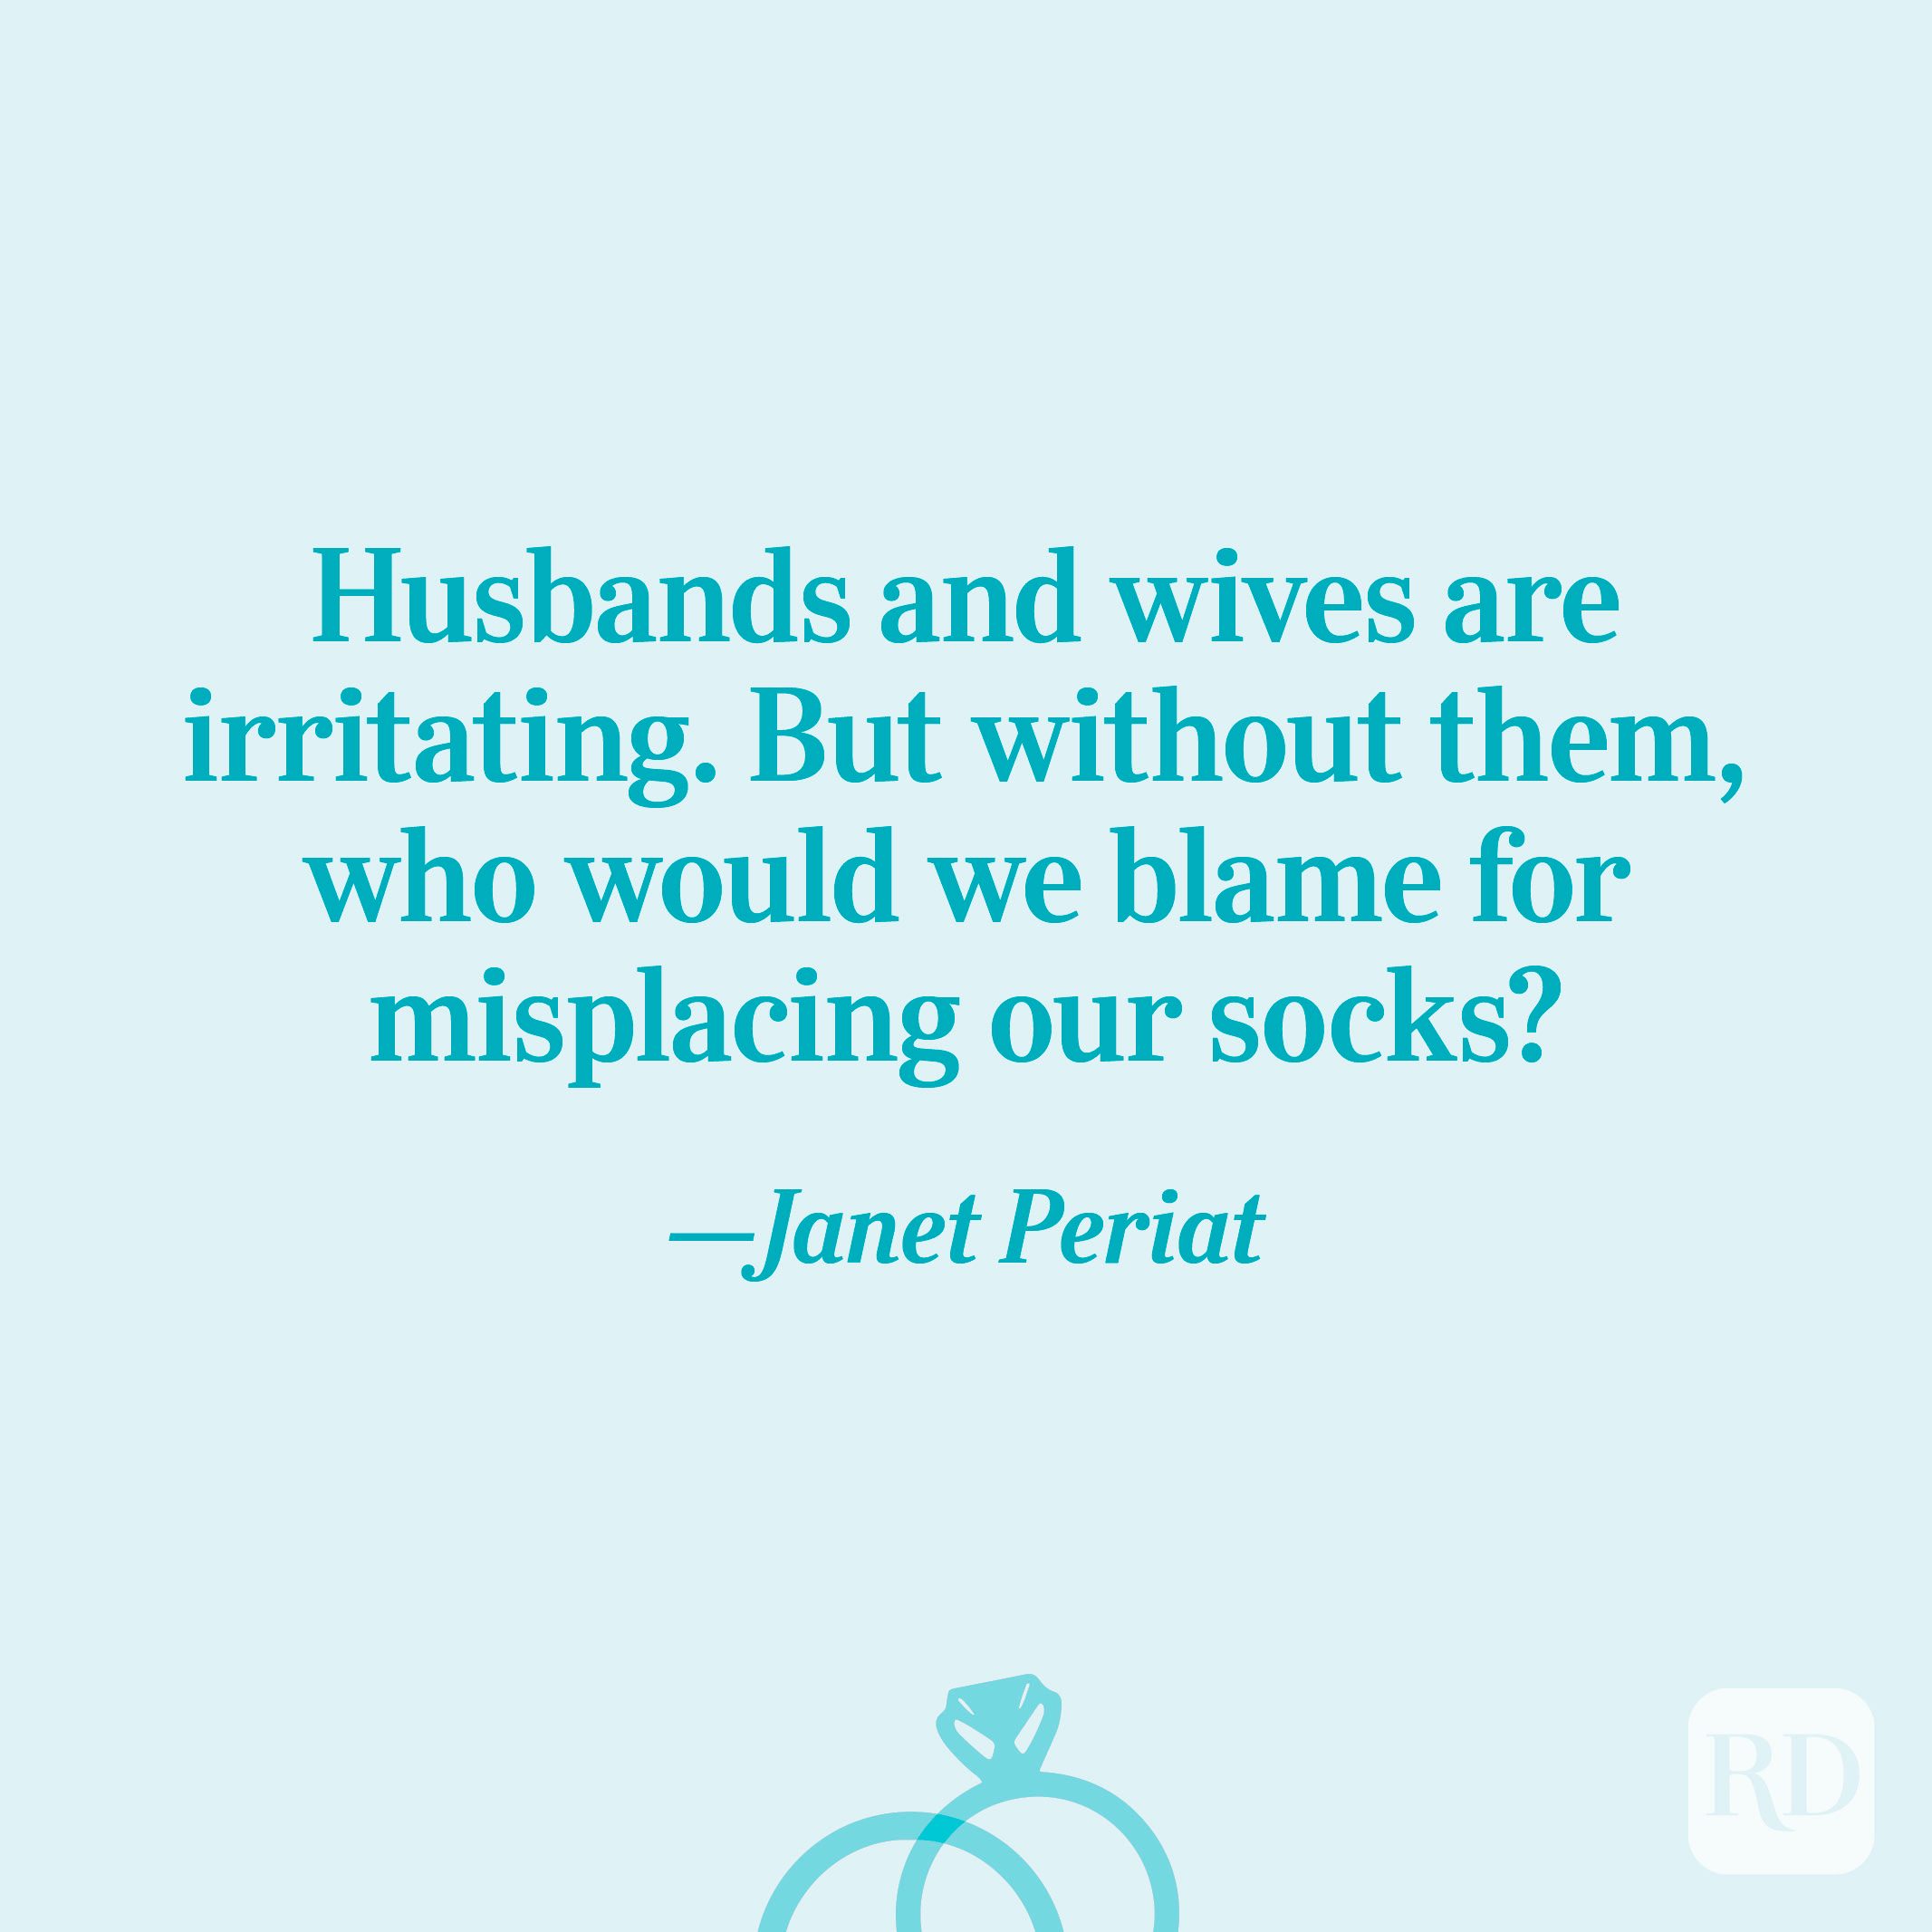 "Husbands and wives are irritating. But without them, who would we blame for misplacing our socks?"—Janet Periat